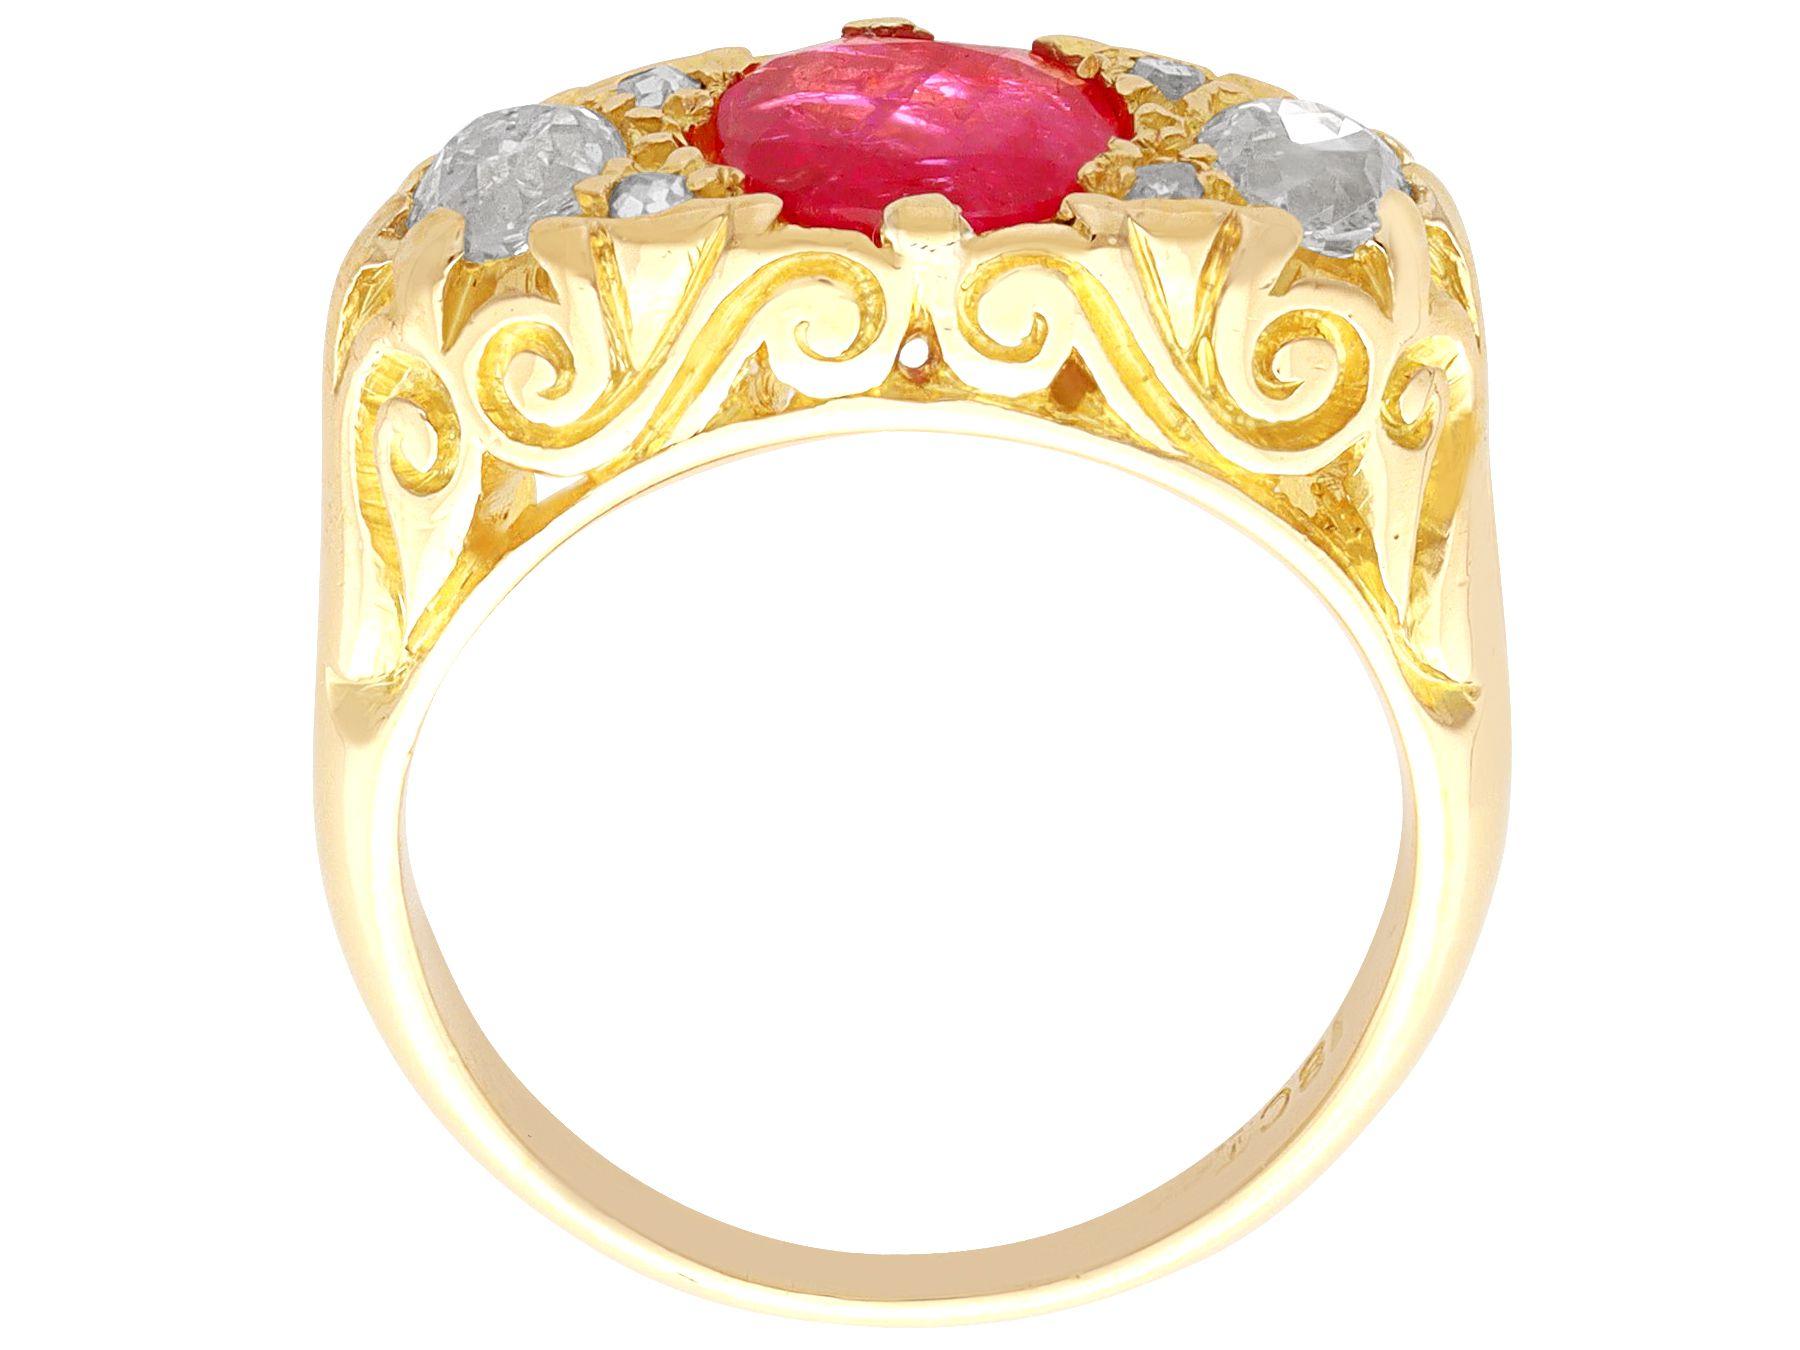 Antique 1.15 Carat Burmese Ruby and 1.36 Carat Diamond Yellow Gold Trilogy Ring For Sale 1